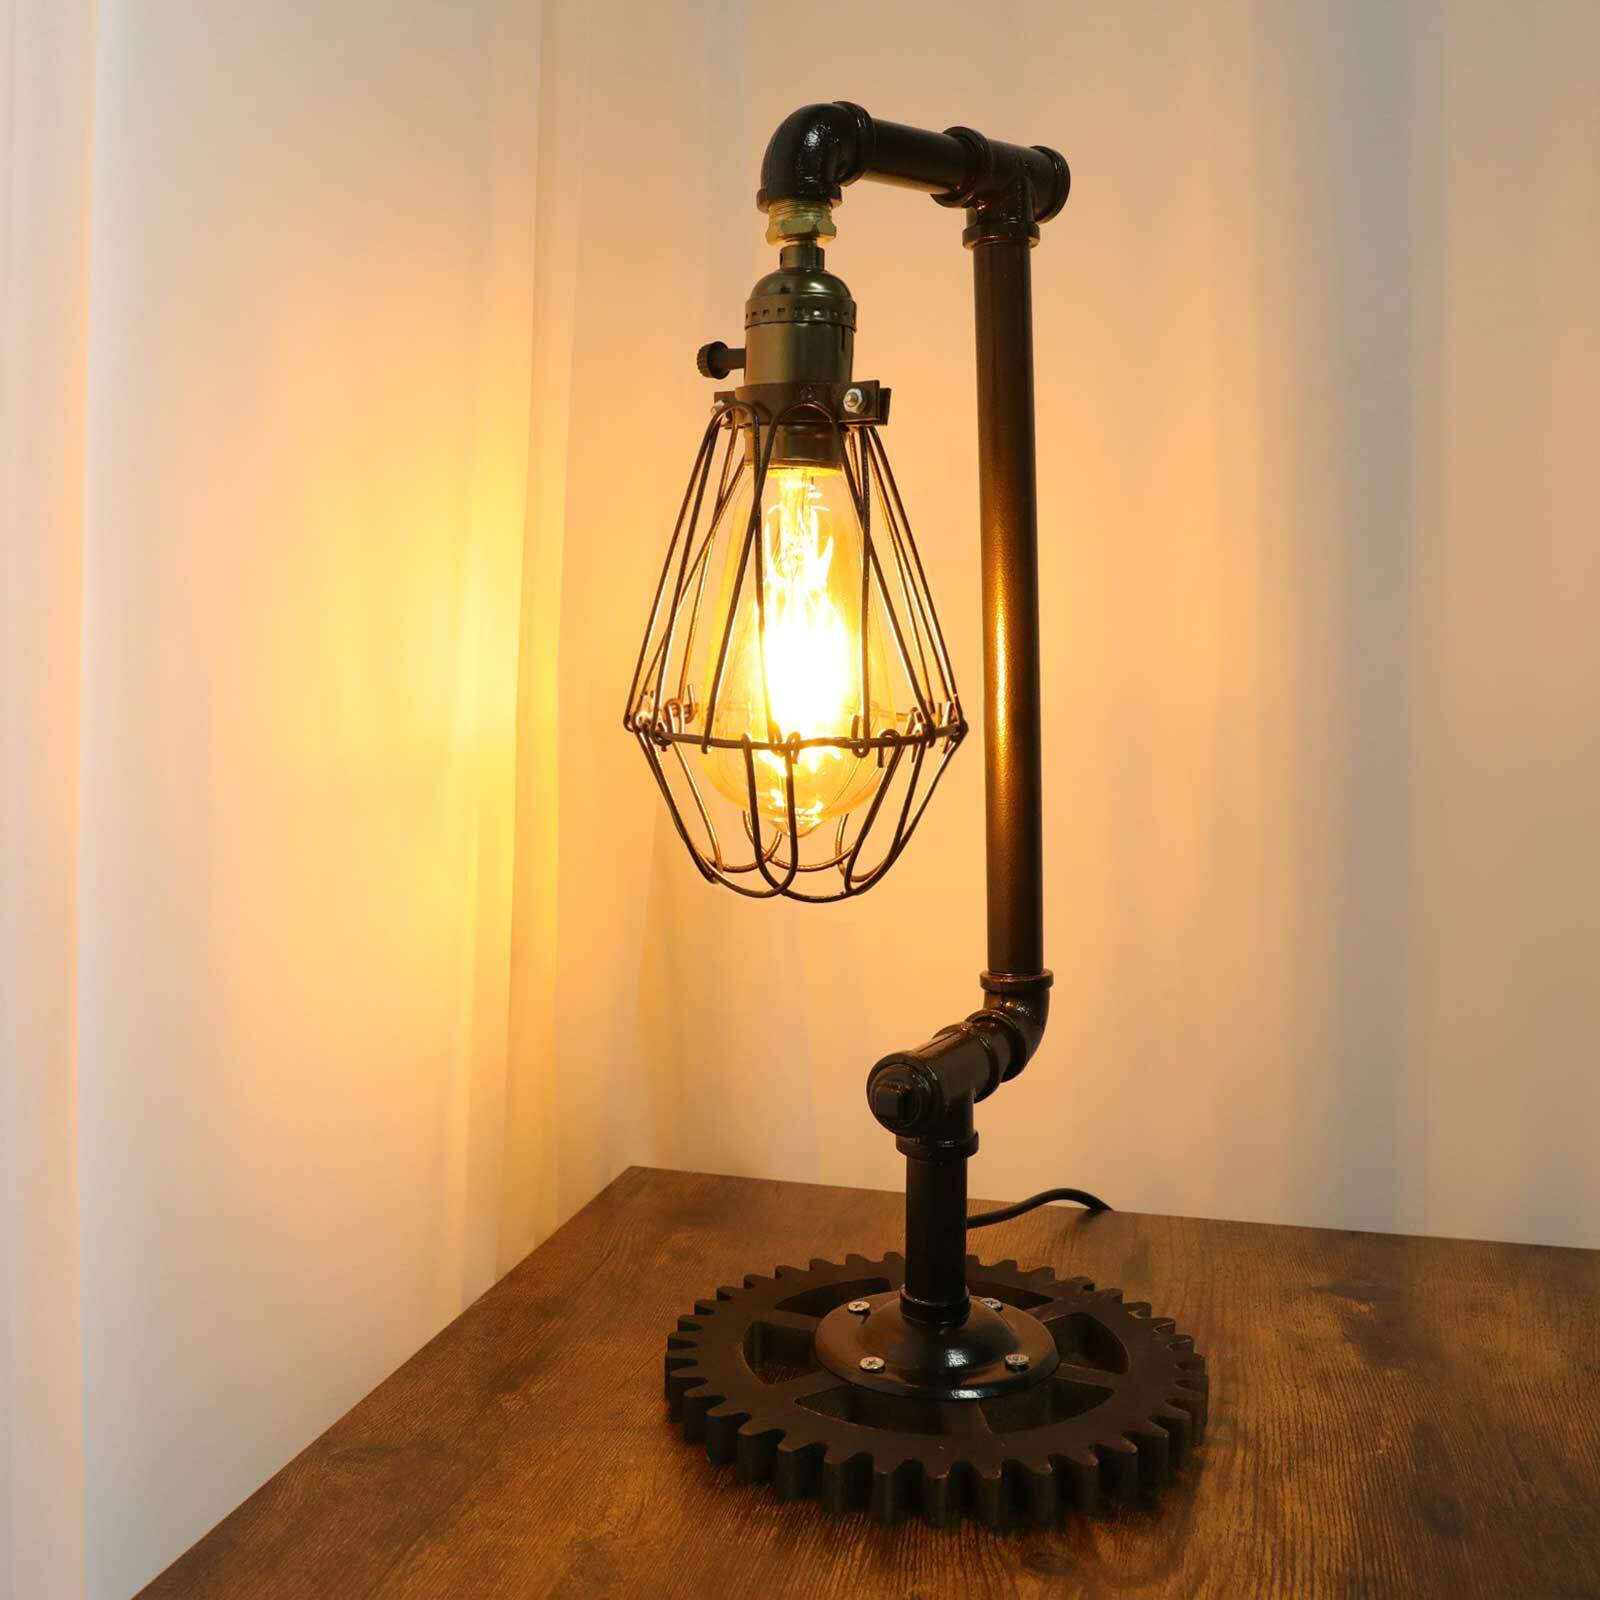 Vintage Water Pipe Desk Light Steampunk Table Lamps Industrial Gear Home Decor